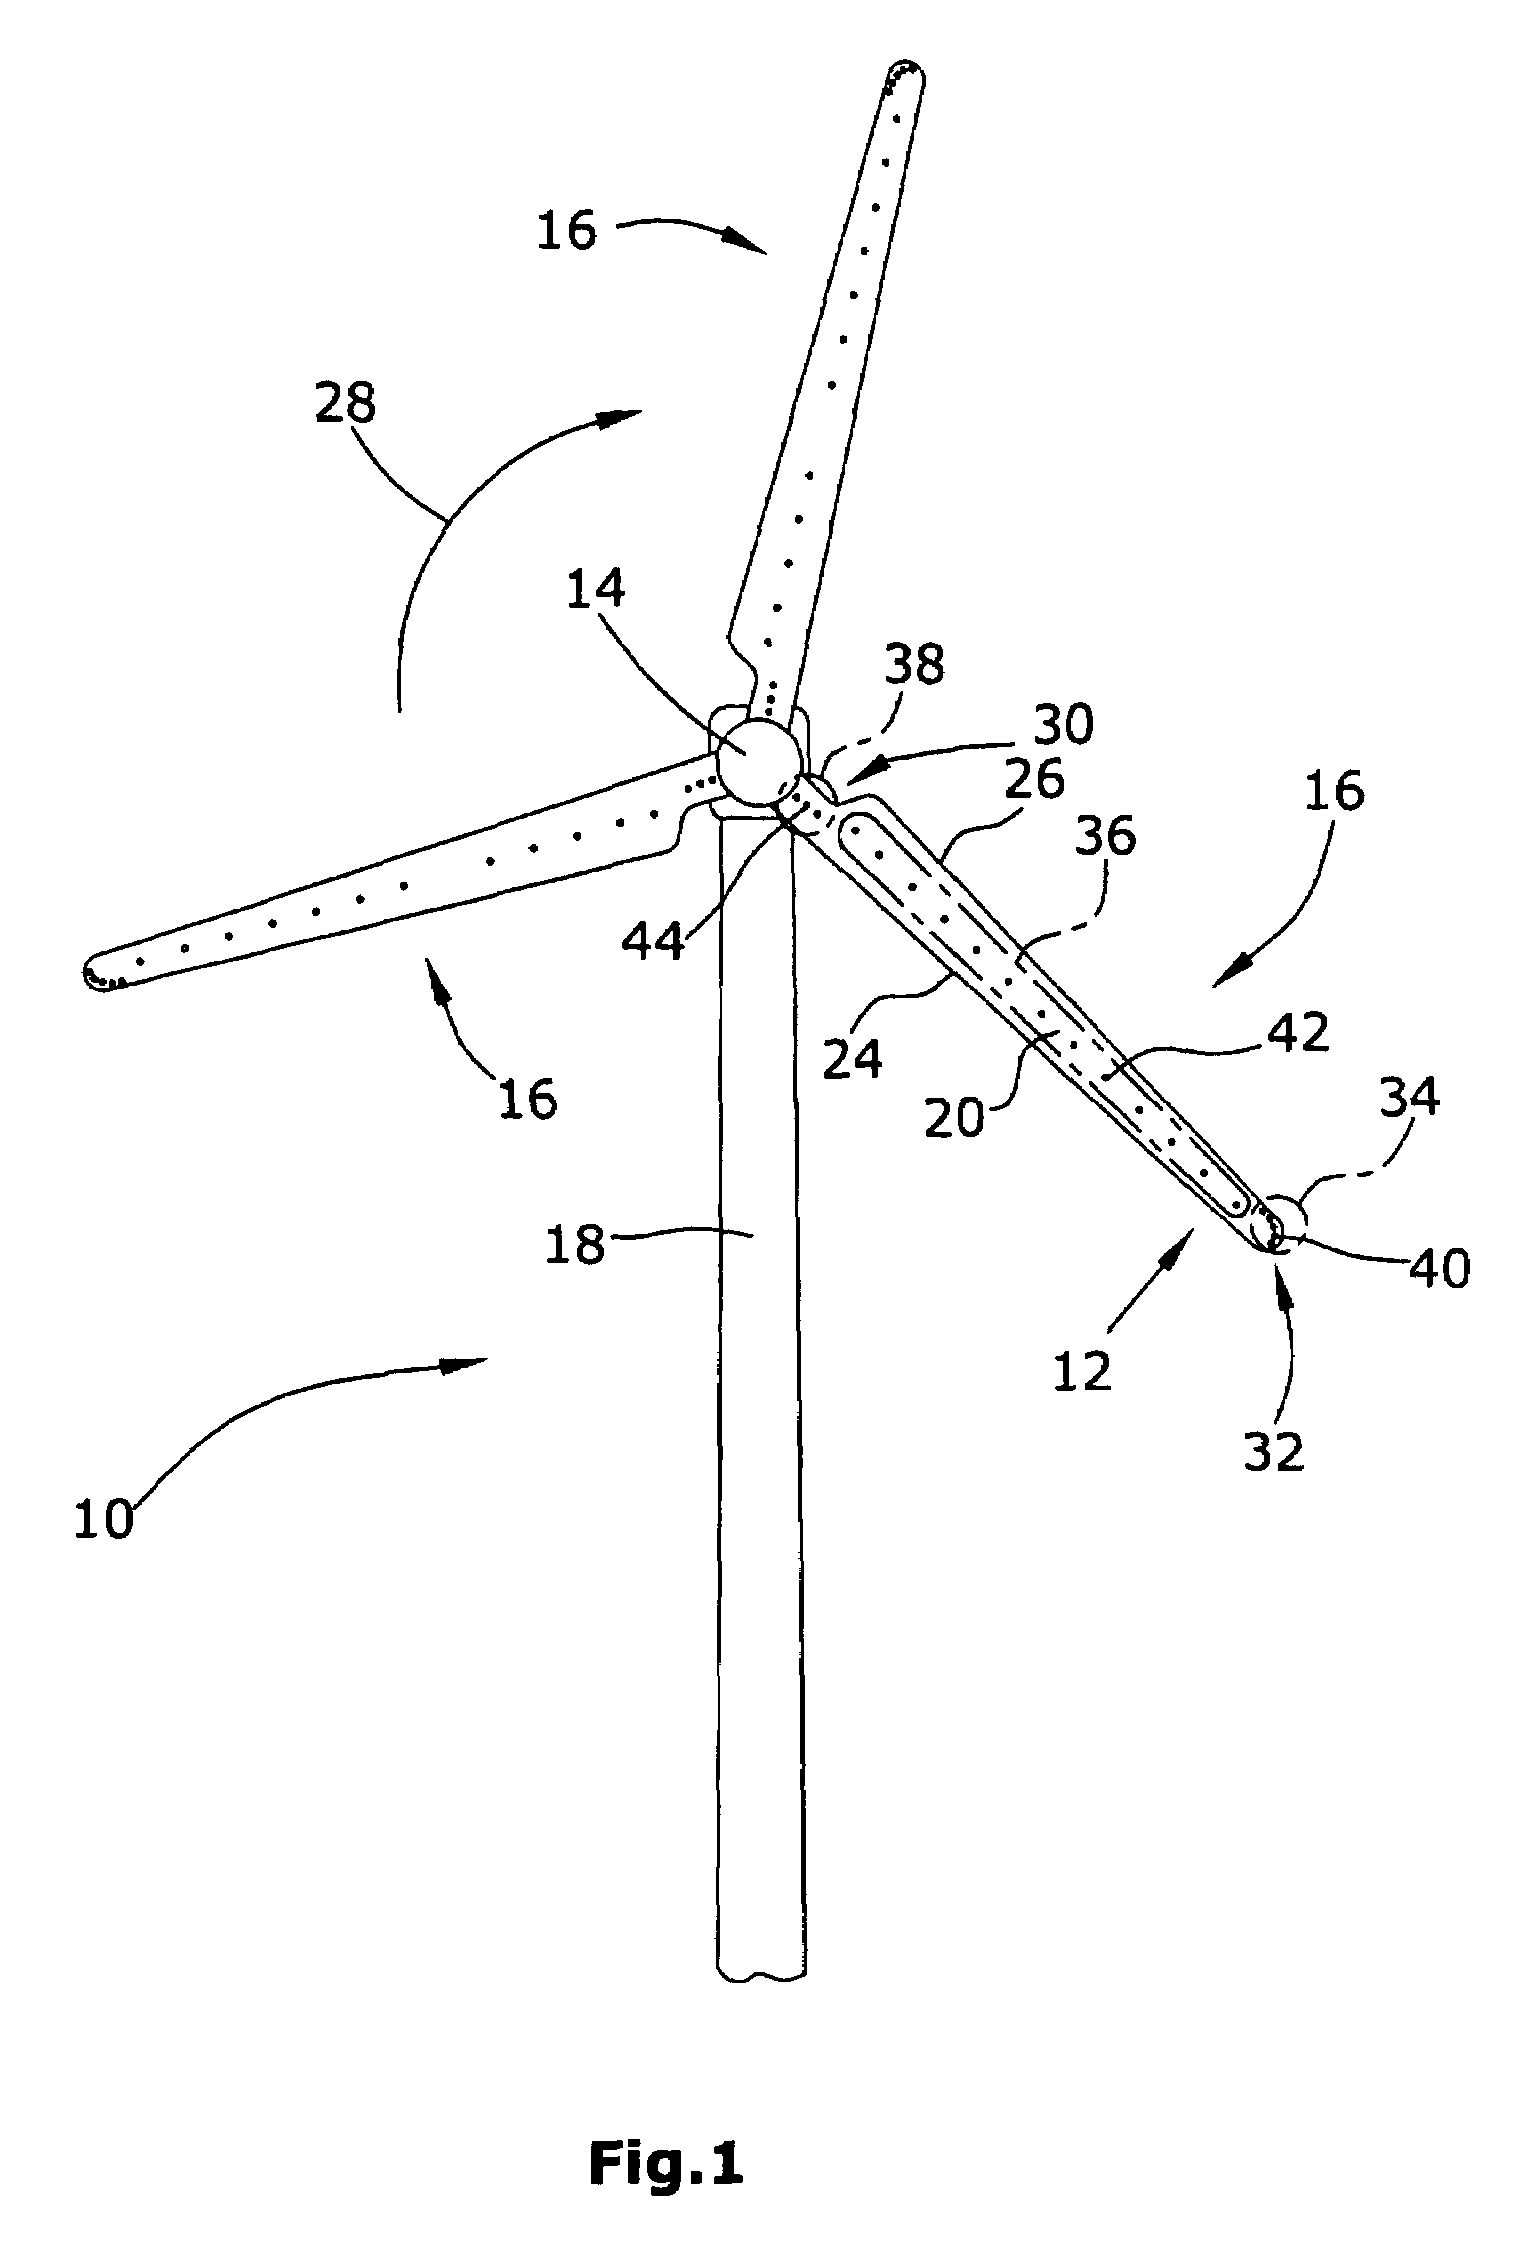 Blade for a rotor of a wind energy turbine